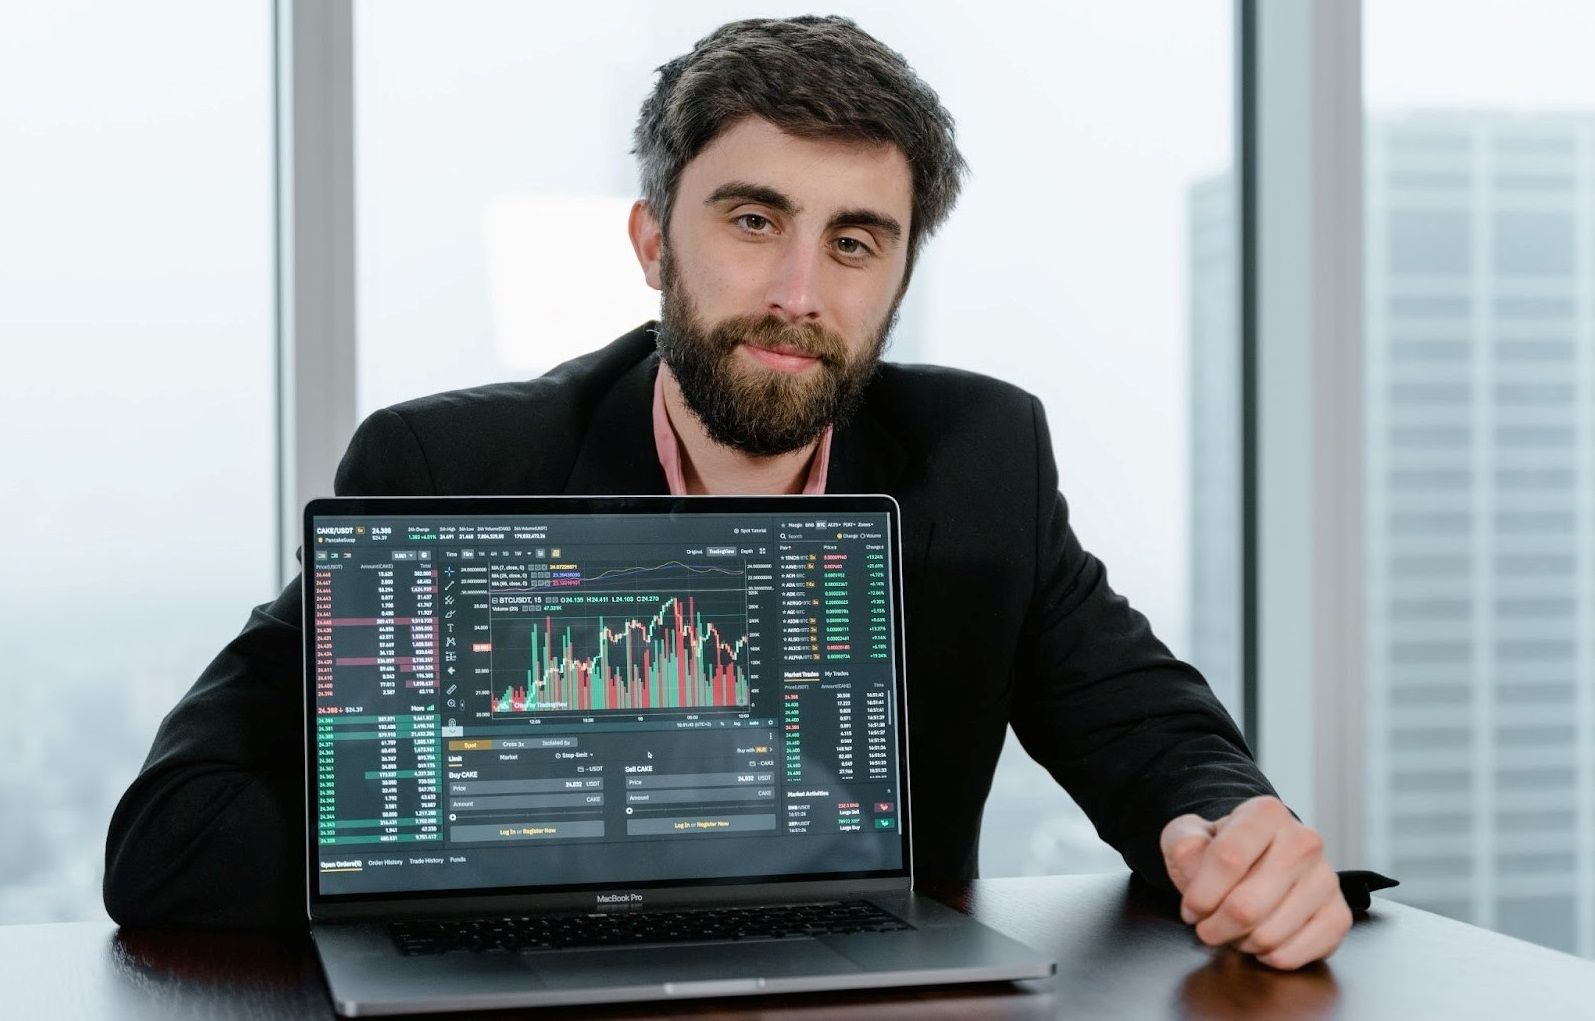 A man sits at a laptop screen showing a cryptocurrency price chart.